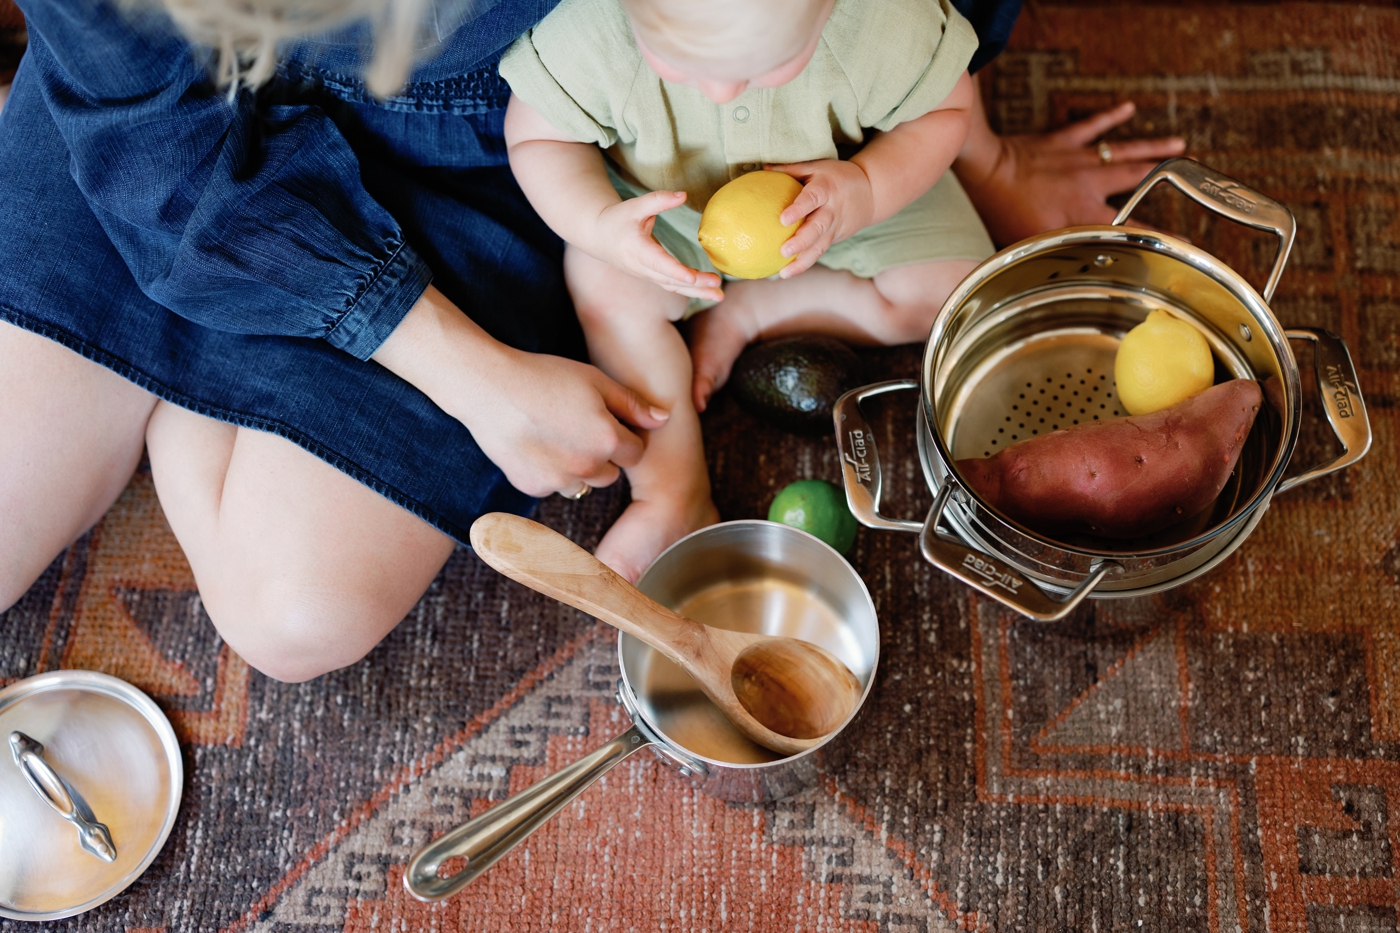 Baby boy with kitchen items, holding a lemon